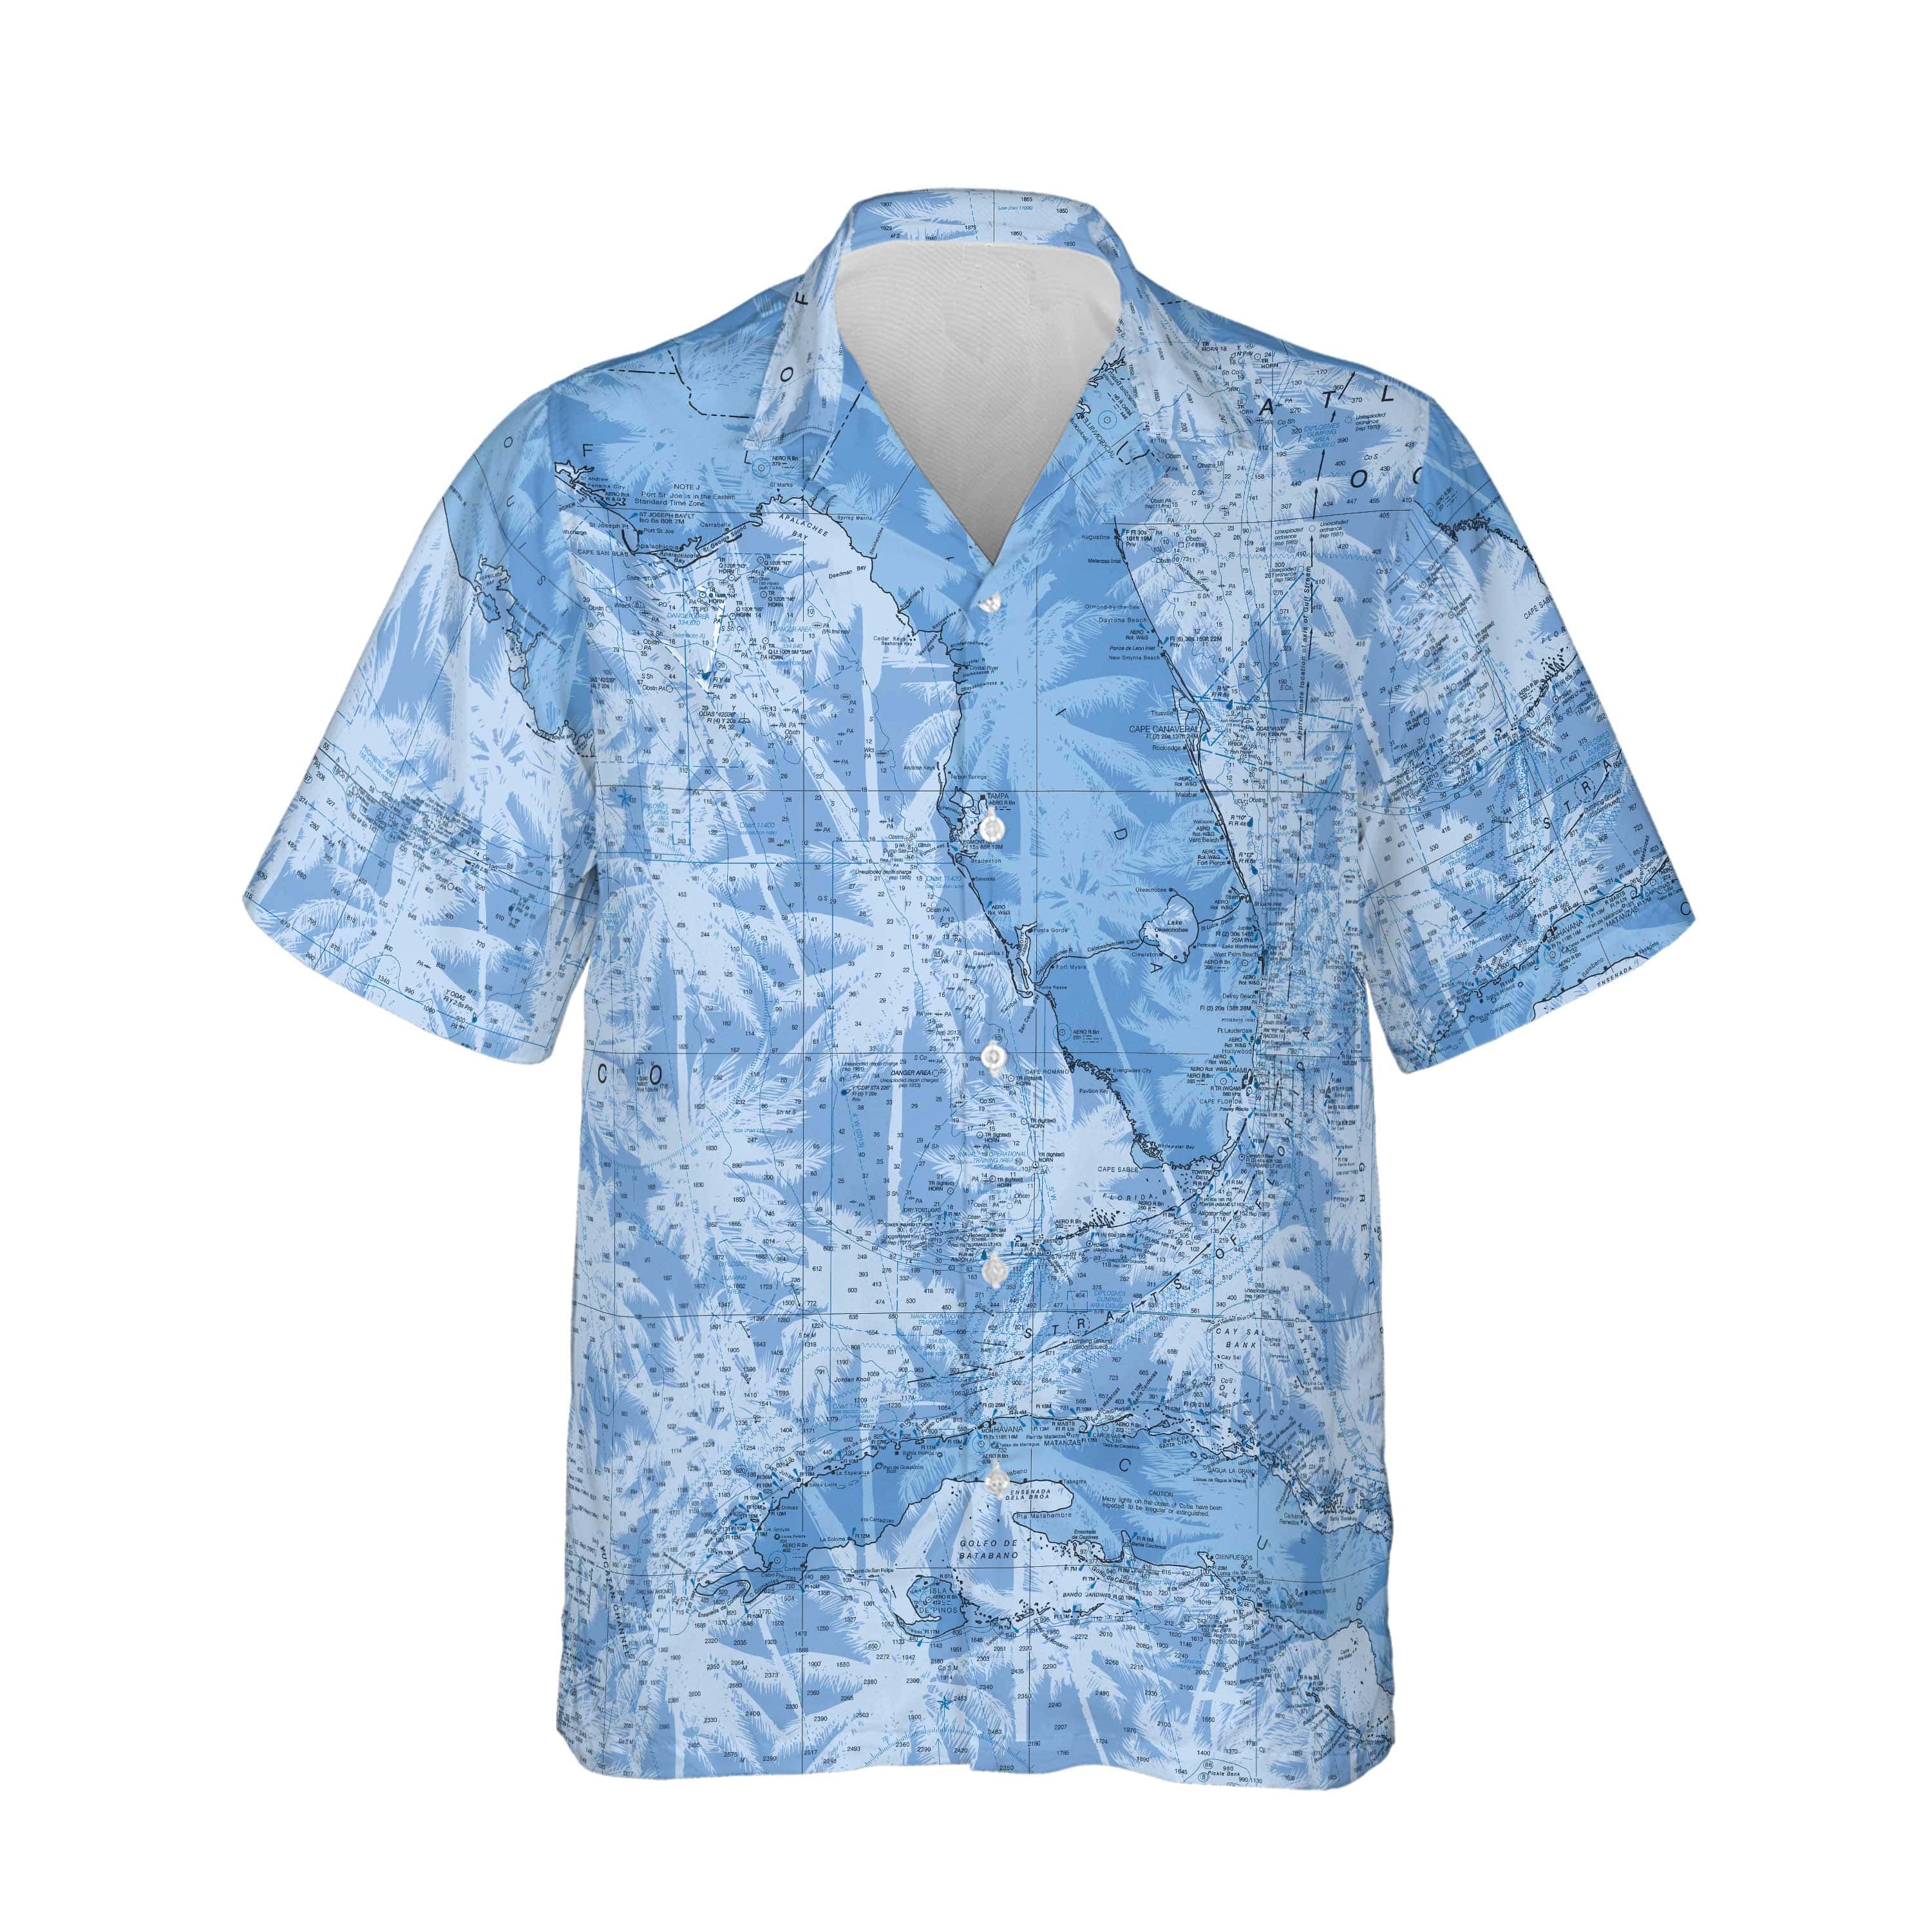 The Deep Palms Gulf of Mexico Shirt